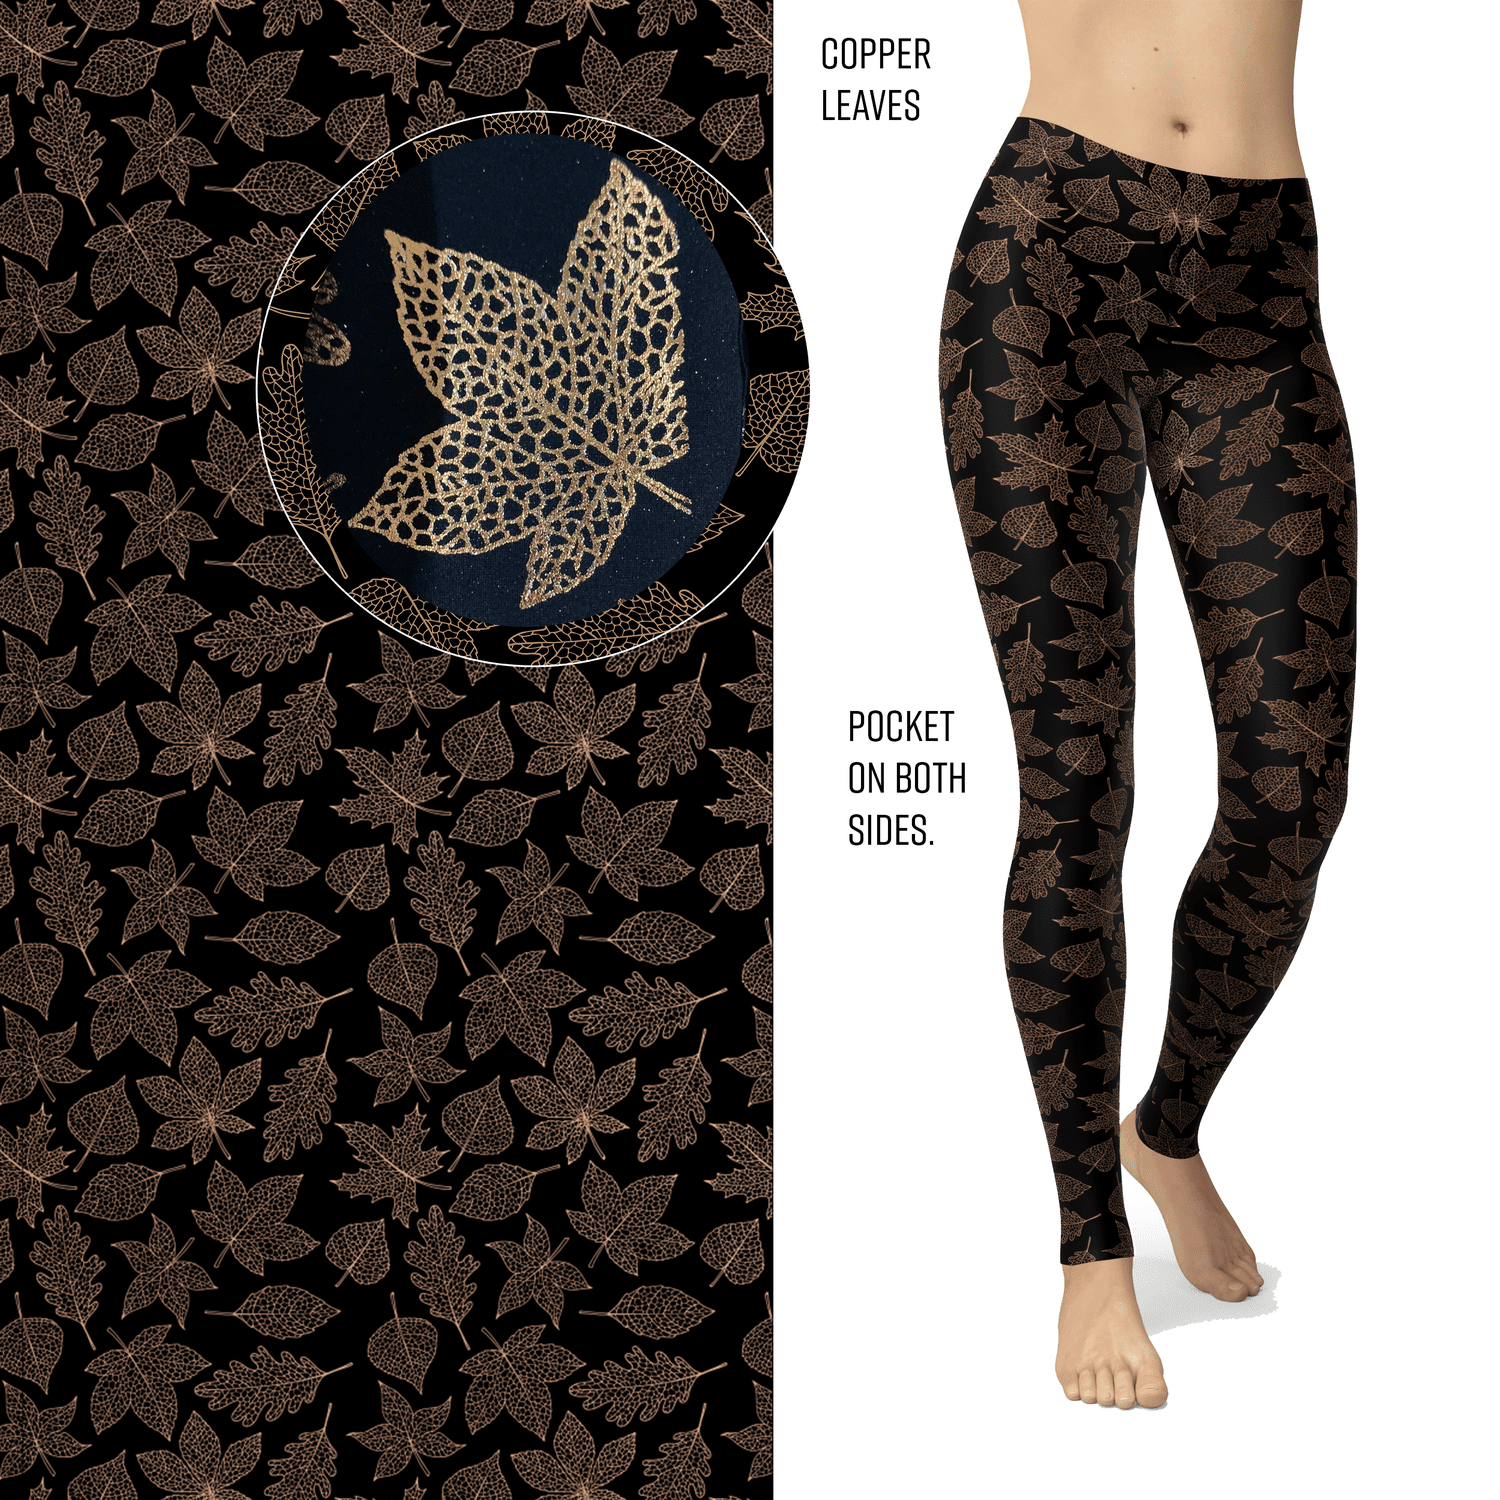 Copper Leaves Leggings with Copper Glitter and Pockets